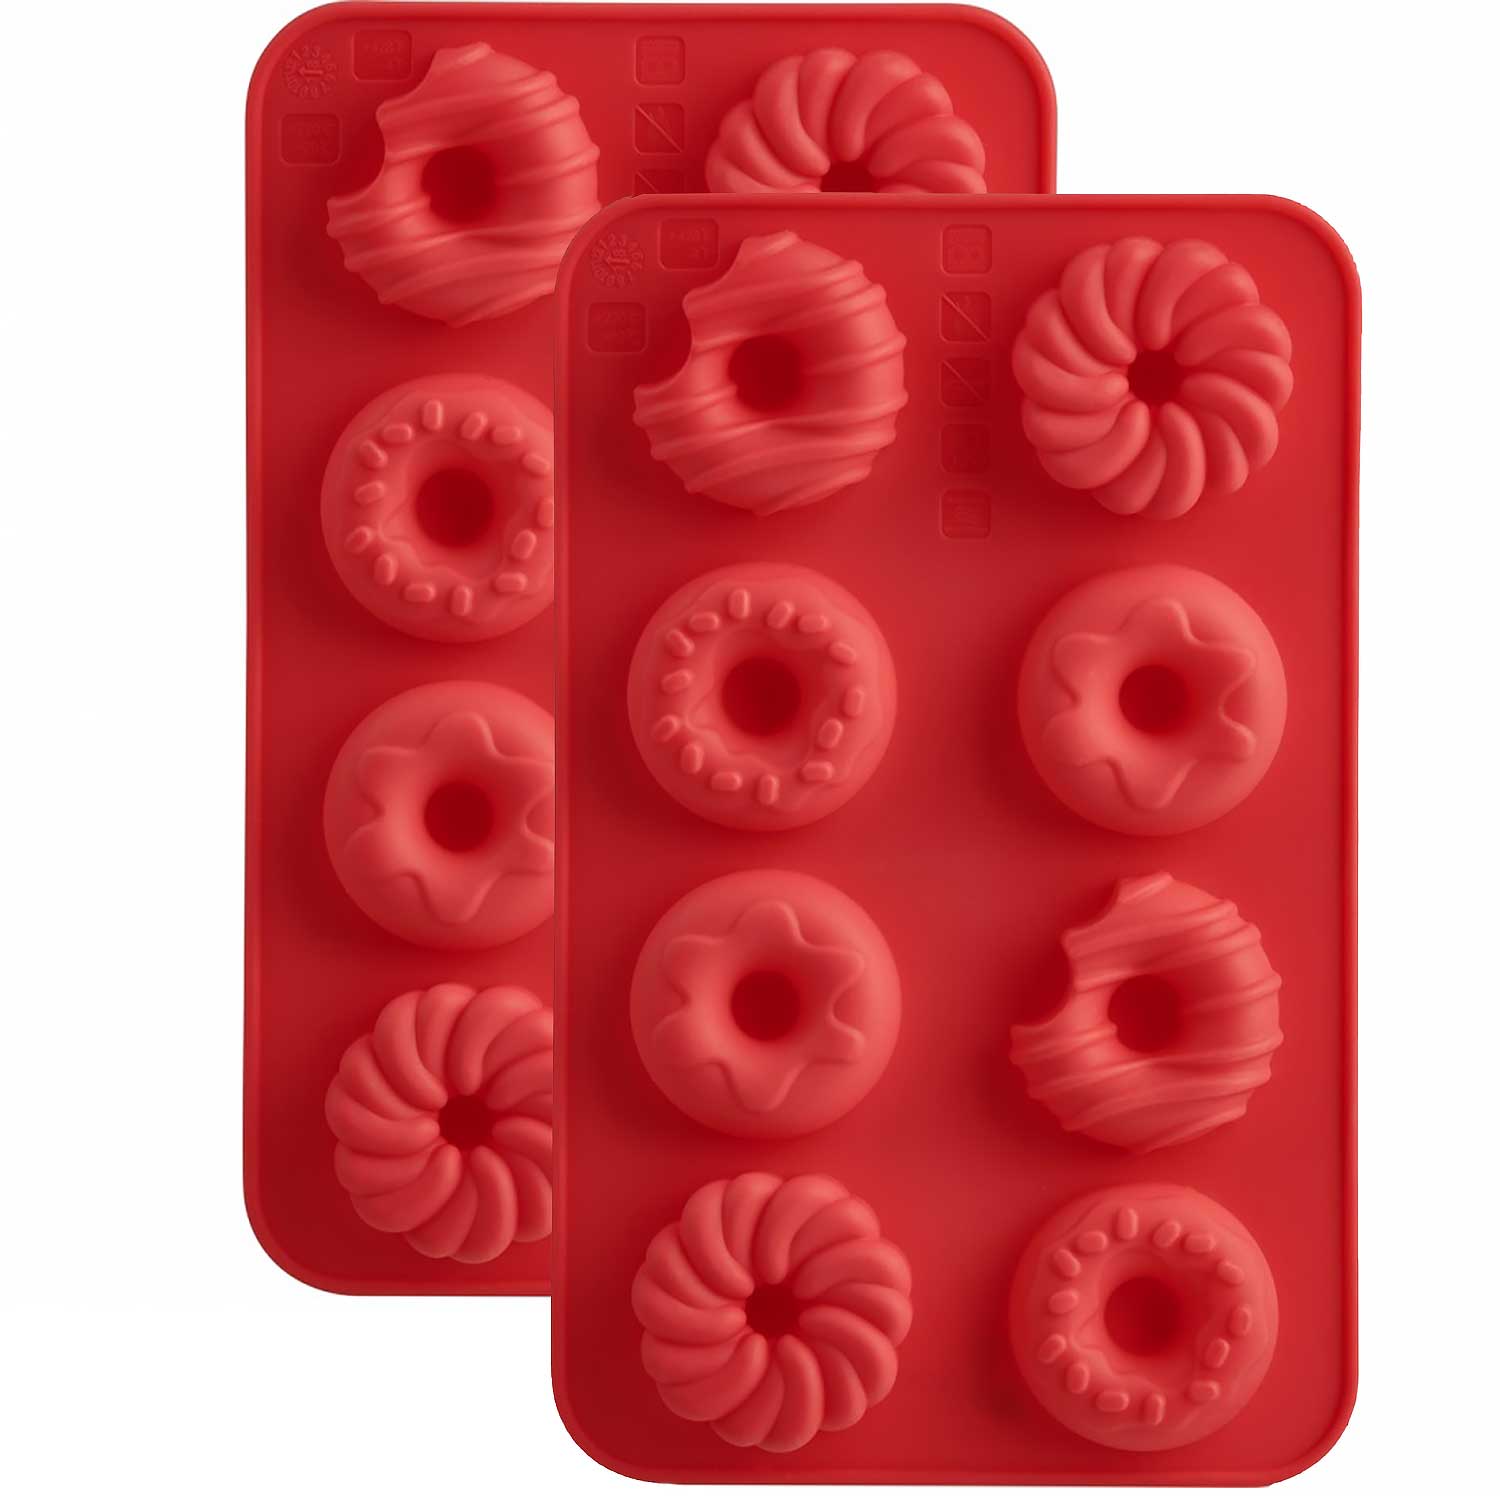 Donut Silicone Chocolate Candy Mold